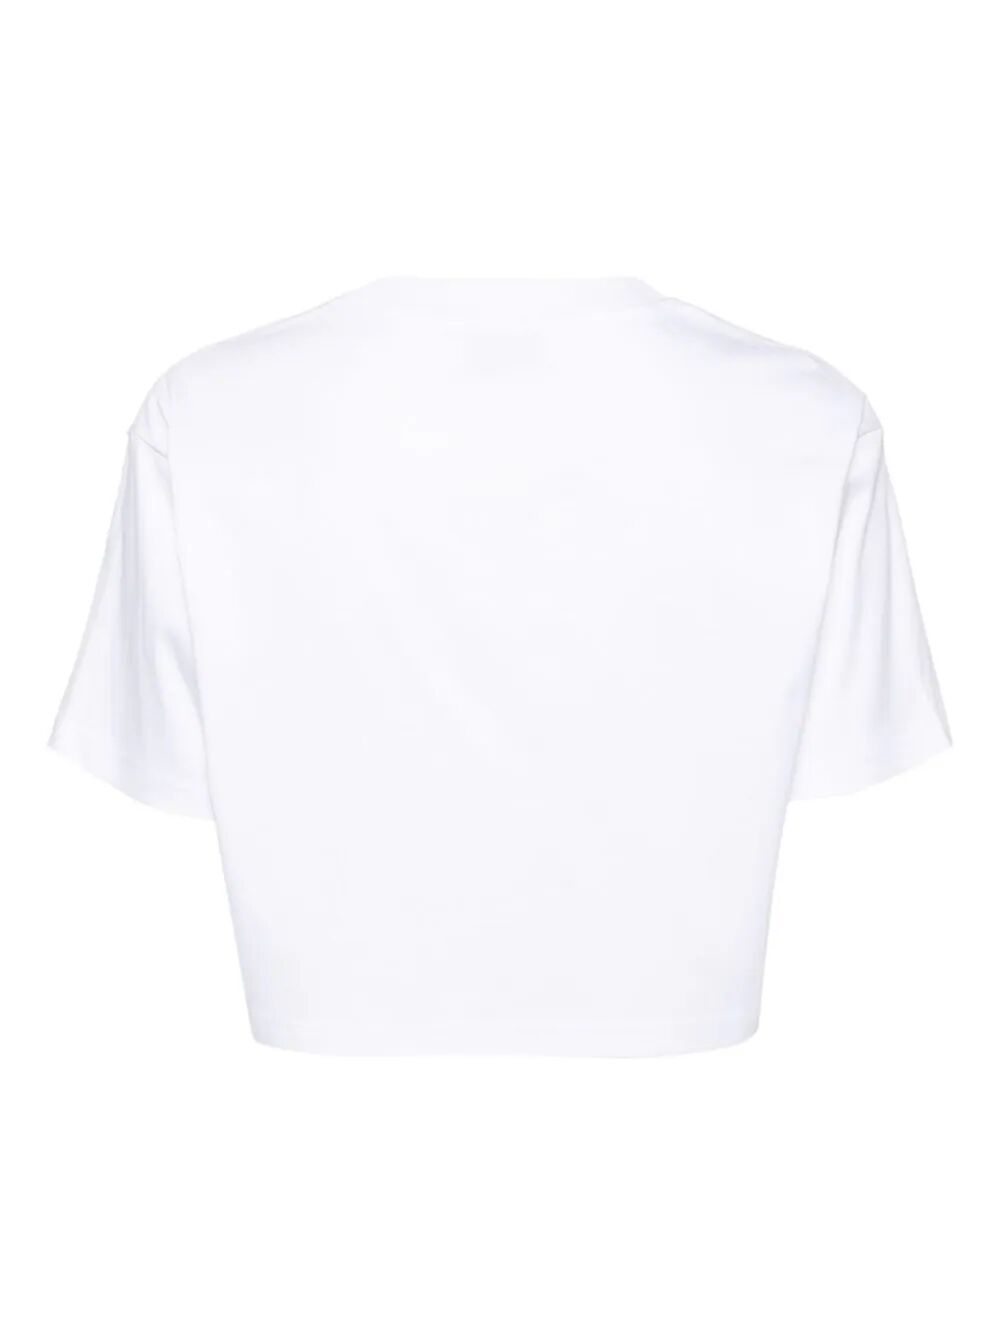 Shop Lanvin Curb Embroidered Cropped T-shirt In White